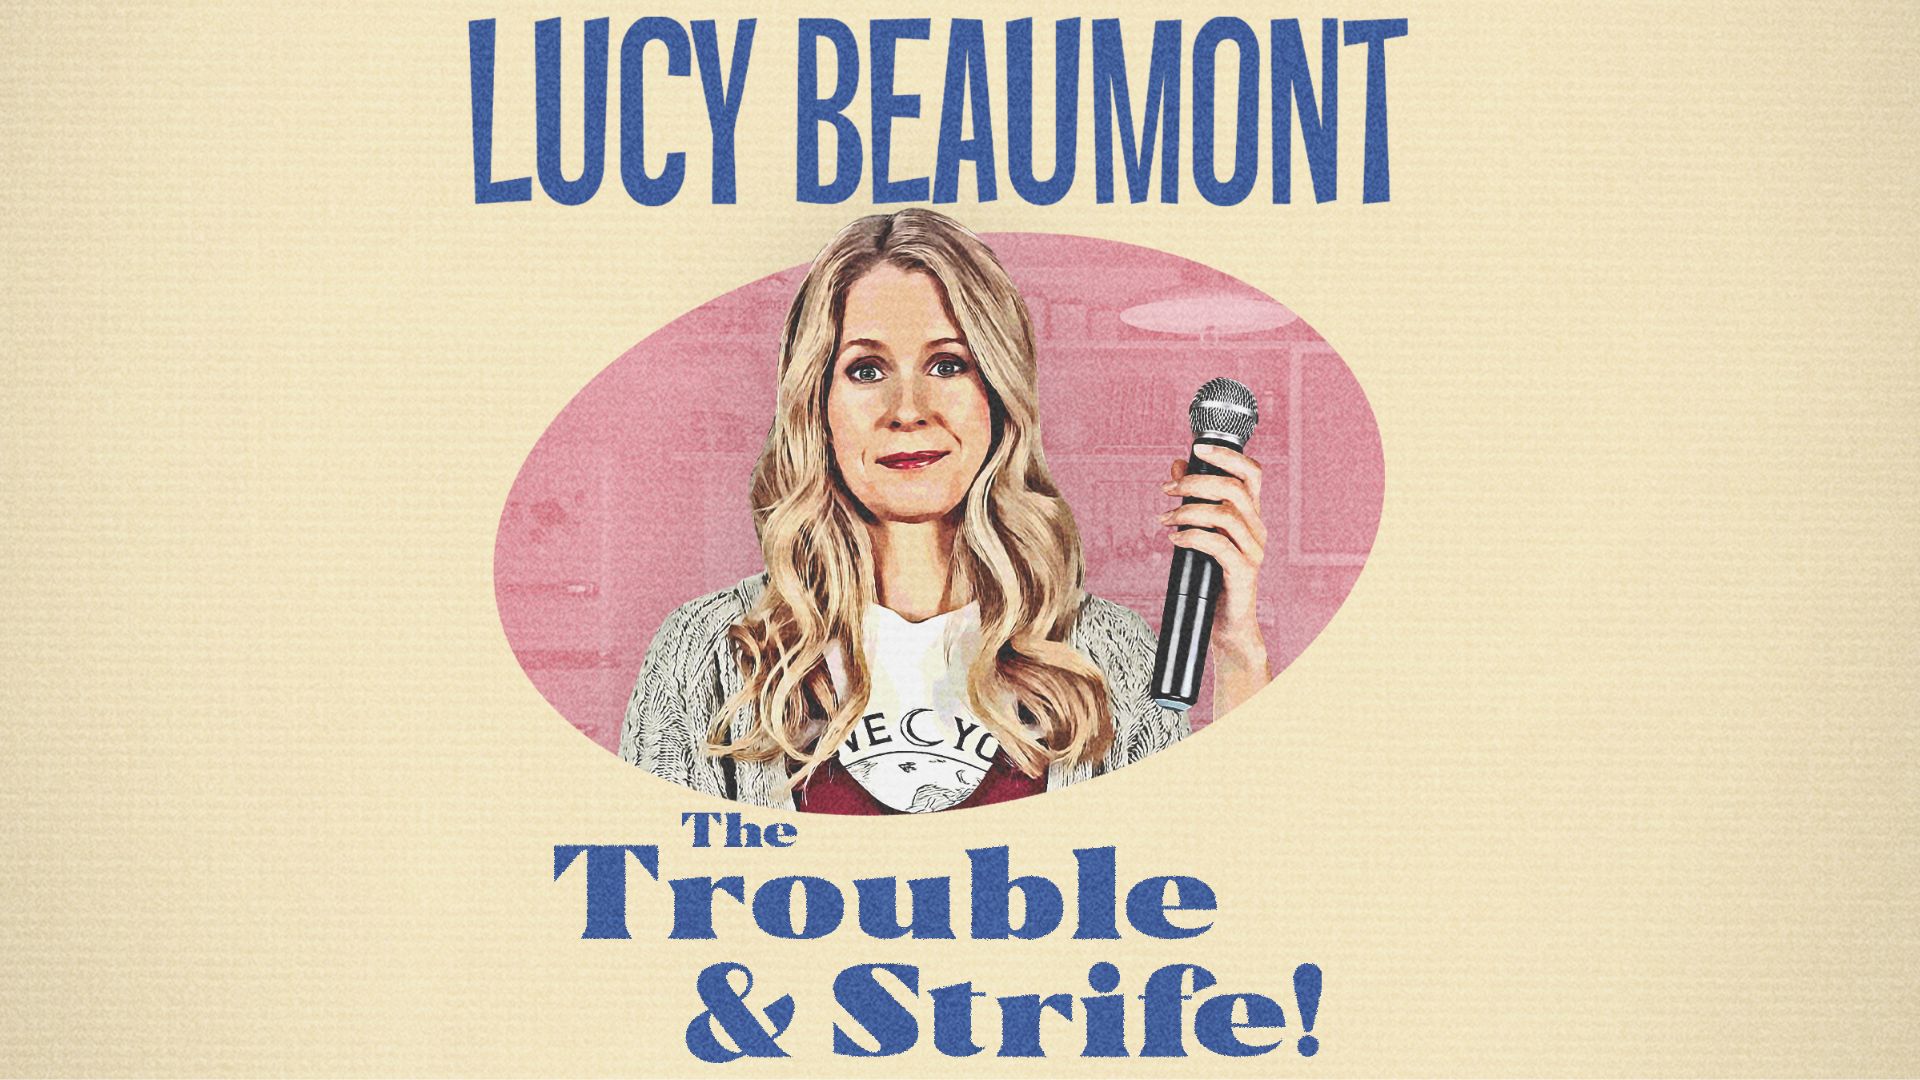 Caricature of Lucy Beaumont waring a grey cardigan and white t-shirt. Holding a microphone.